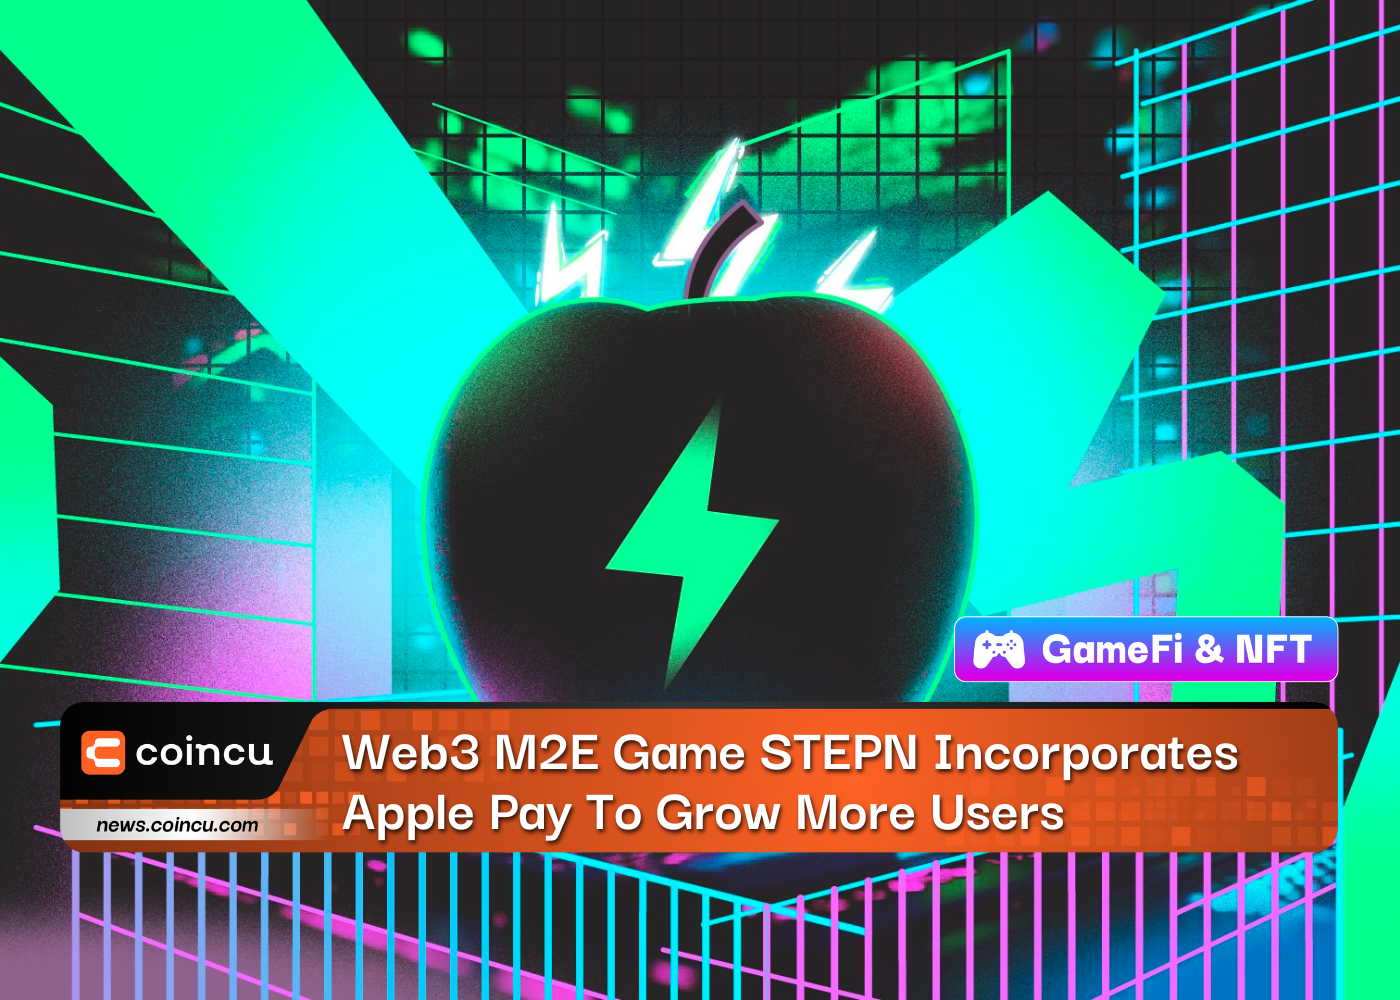 Web3 M2E Game STEPN Incorporates Apple Pay To Grow More Users